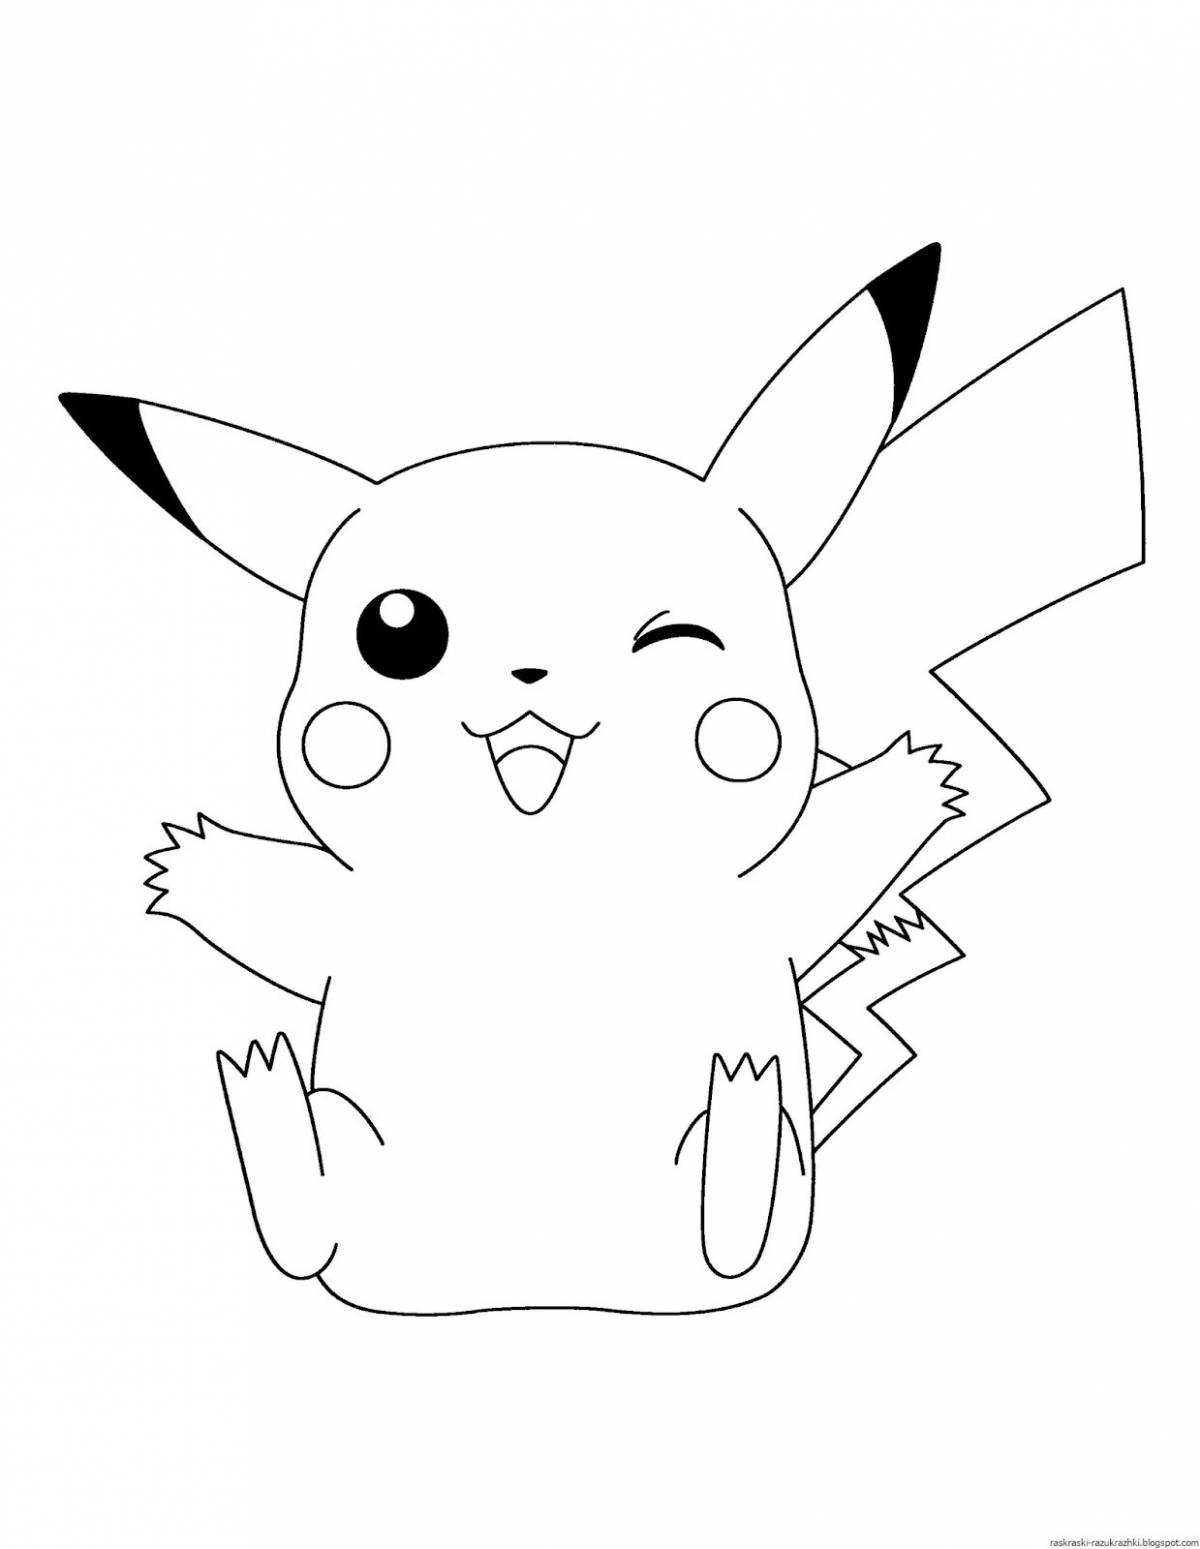 Colouring funny pikachu seal